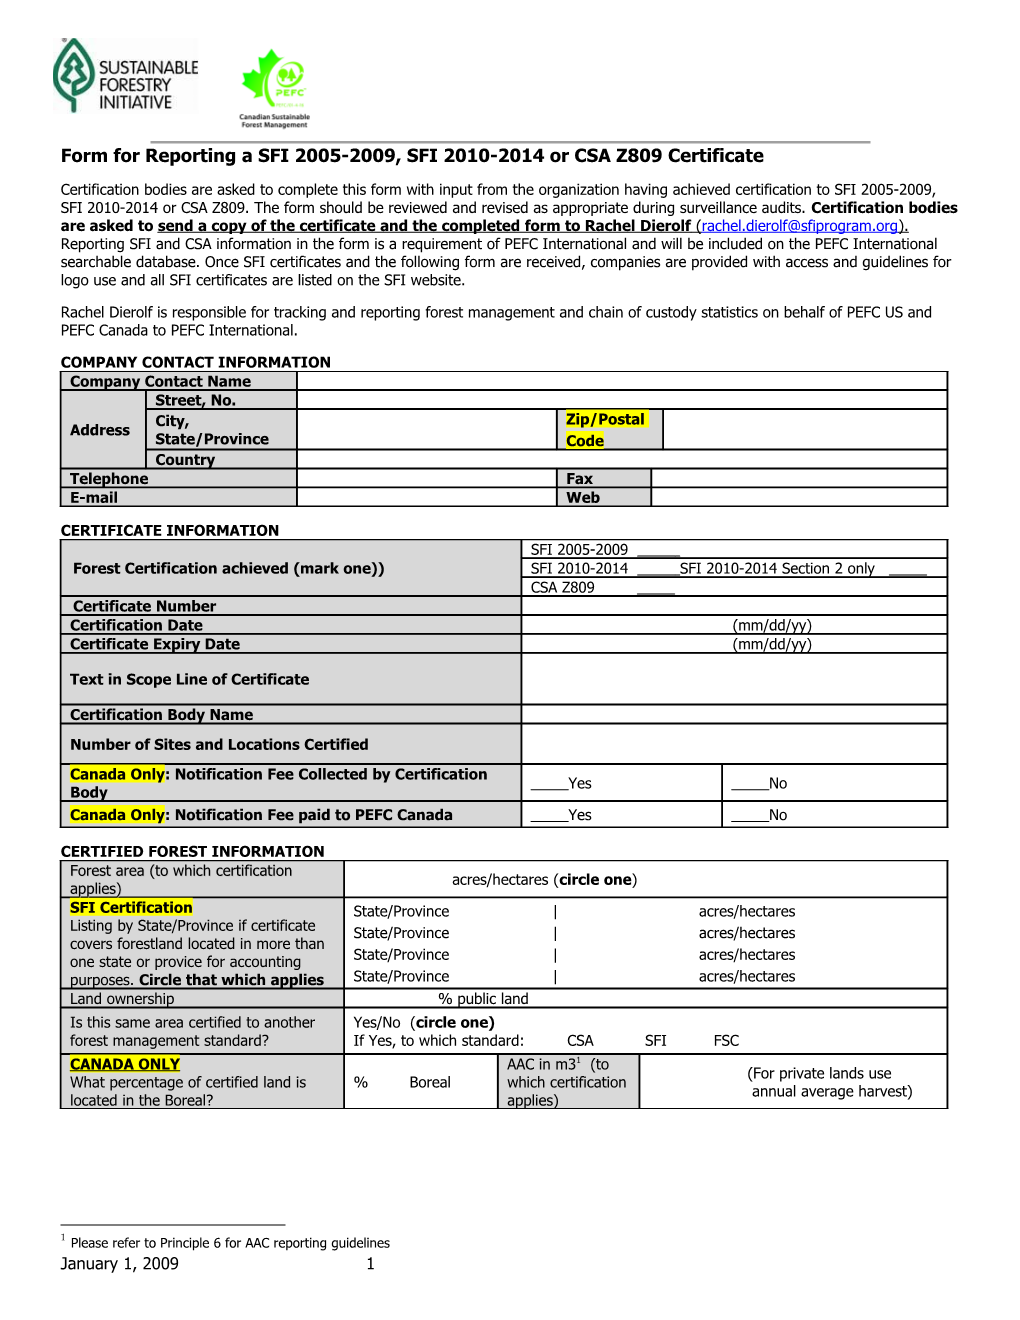 Form for Reporting a Forest Management Certification in Canada